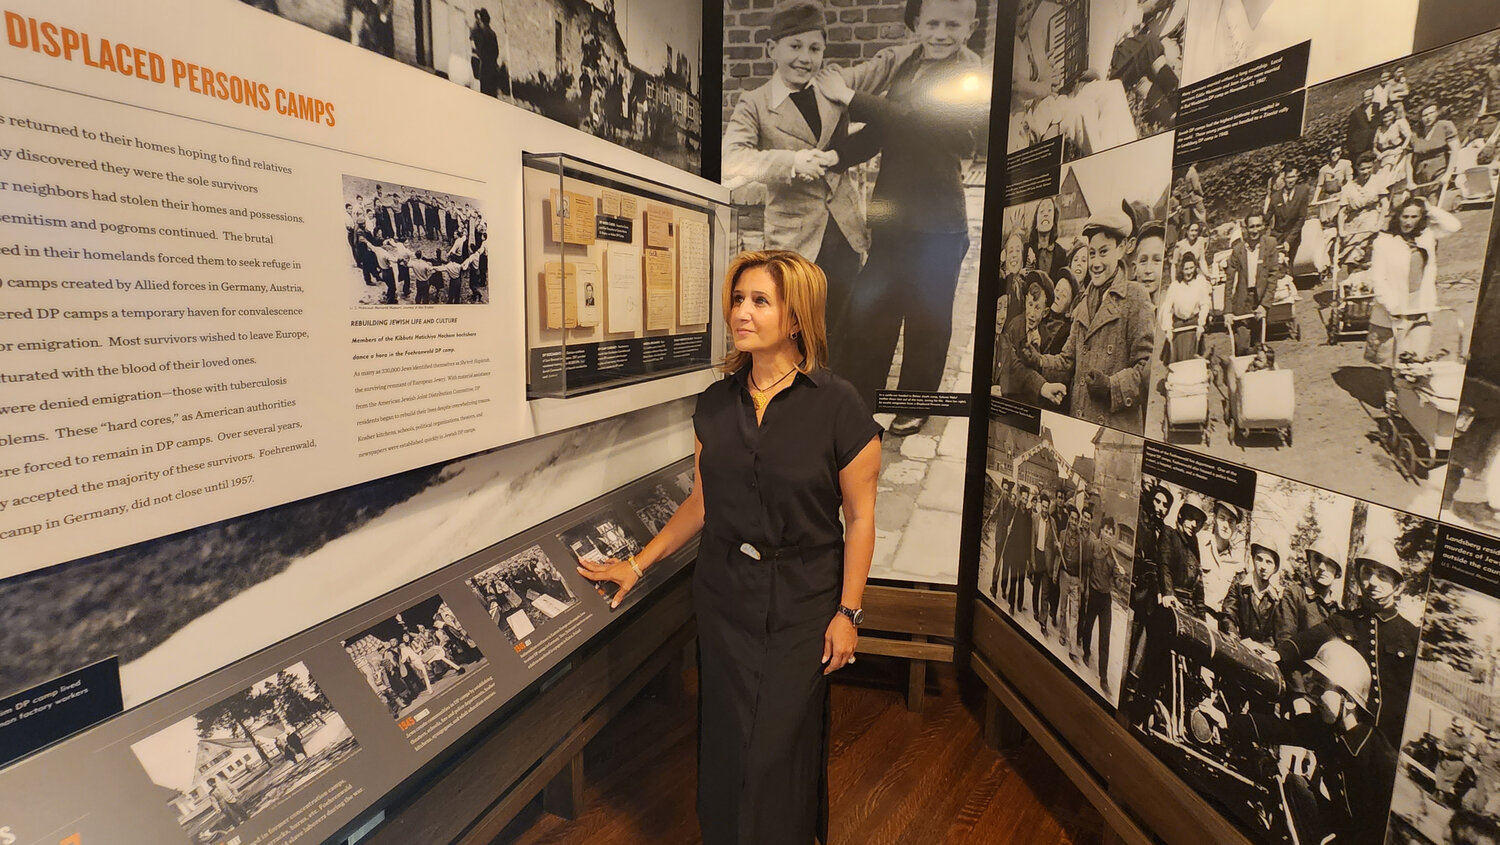 he Holocaust Memorial and Tolerance Center has exhibits detailing the timeline and experiences of the Holocaust. Mojgan ‘Moji’ Pourmoradi, the center’s new director, hopes to extend the museum’s reach in educating the public on the atrocities of war.